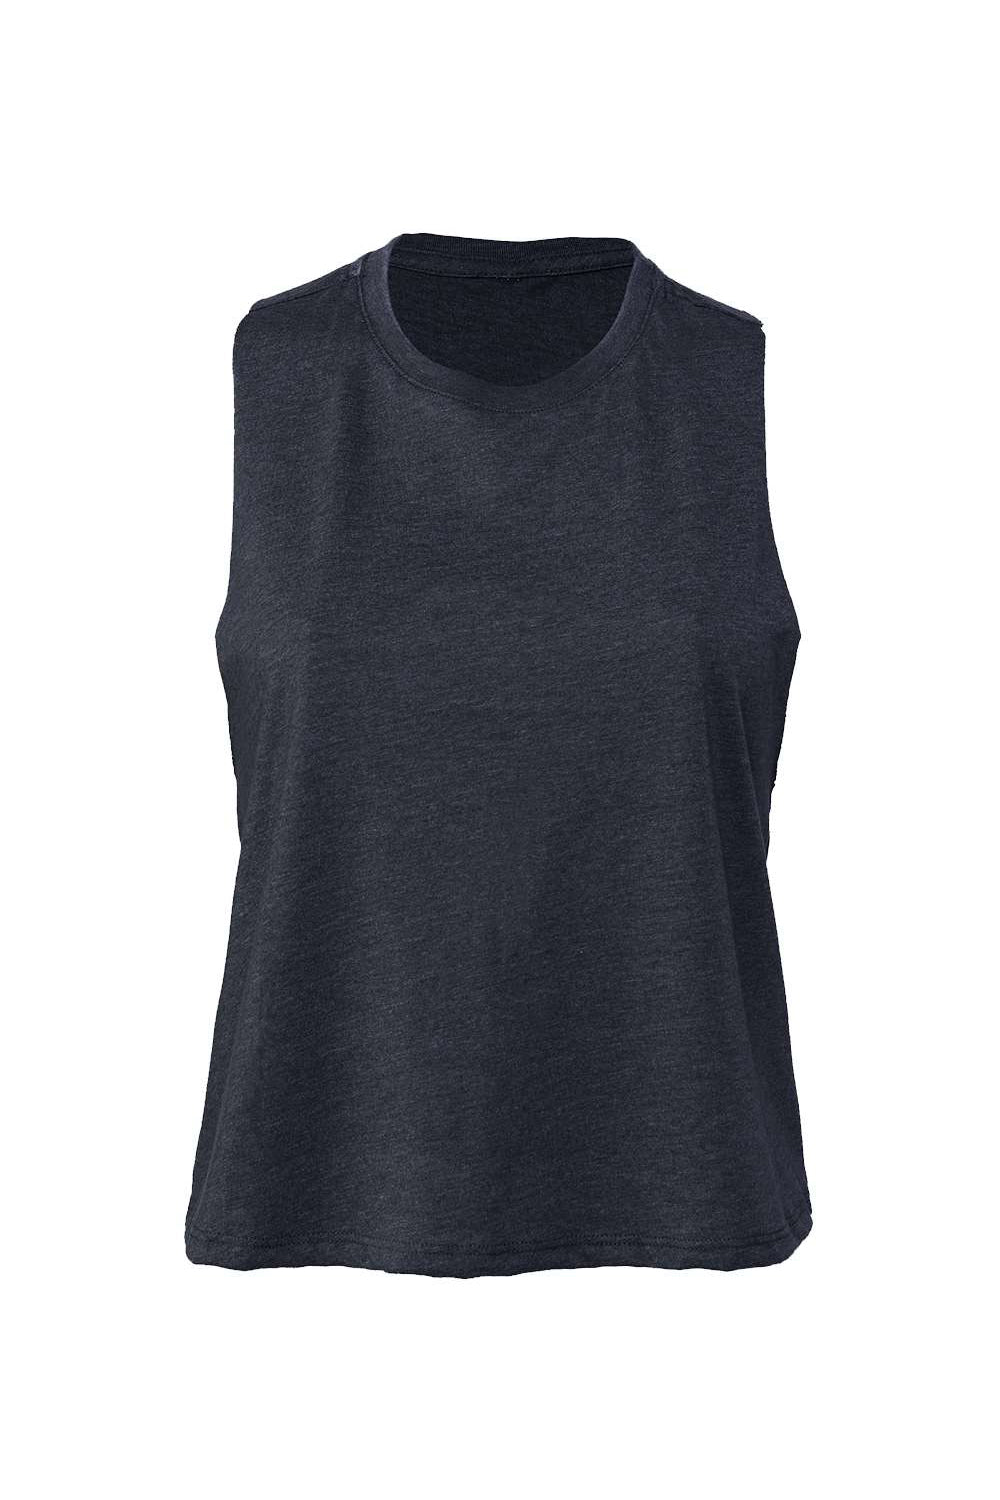 Bella + Canvas BC6682/6682 Womens Cropped Tank Top Heather Navy Blue Flat Front